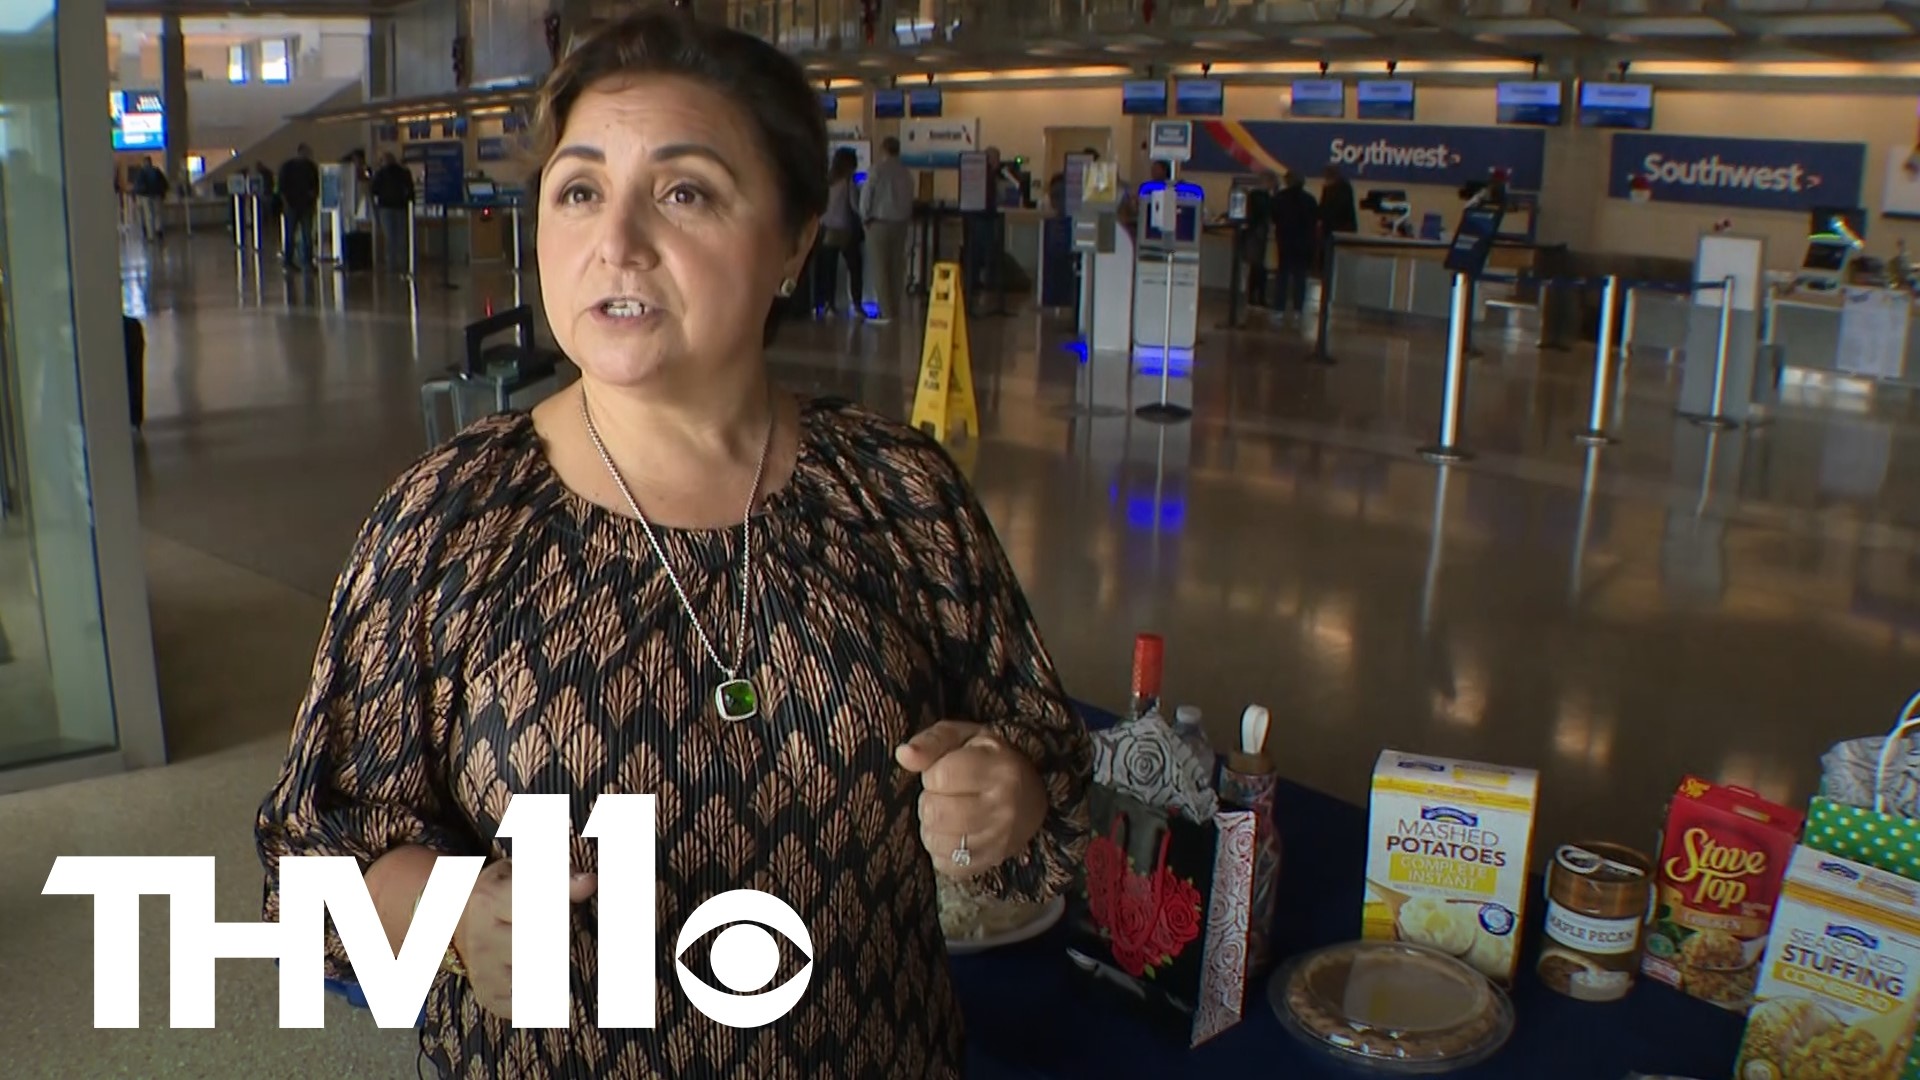 Officials at the Clinton National Airport have some tips to share before you pack your bags to head out on your big holiday trip!